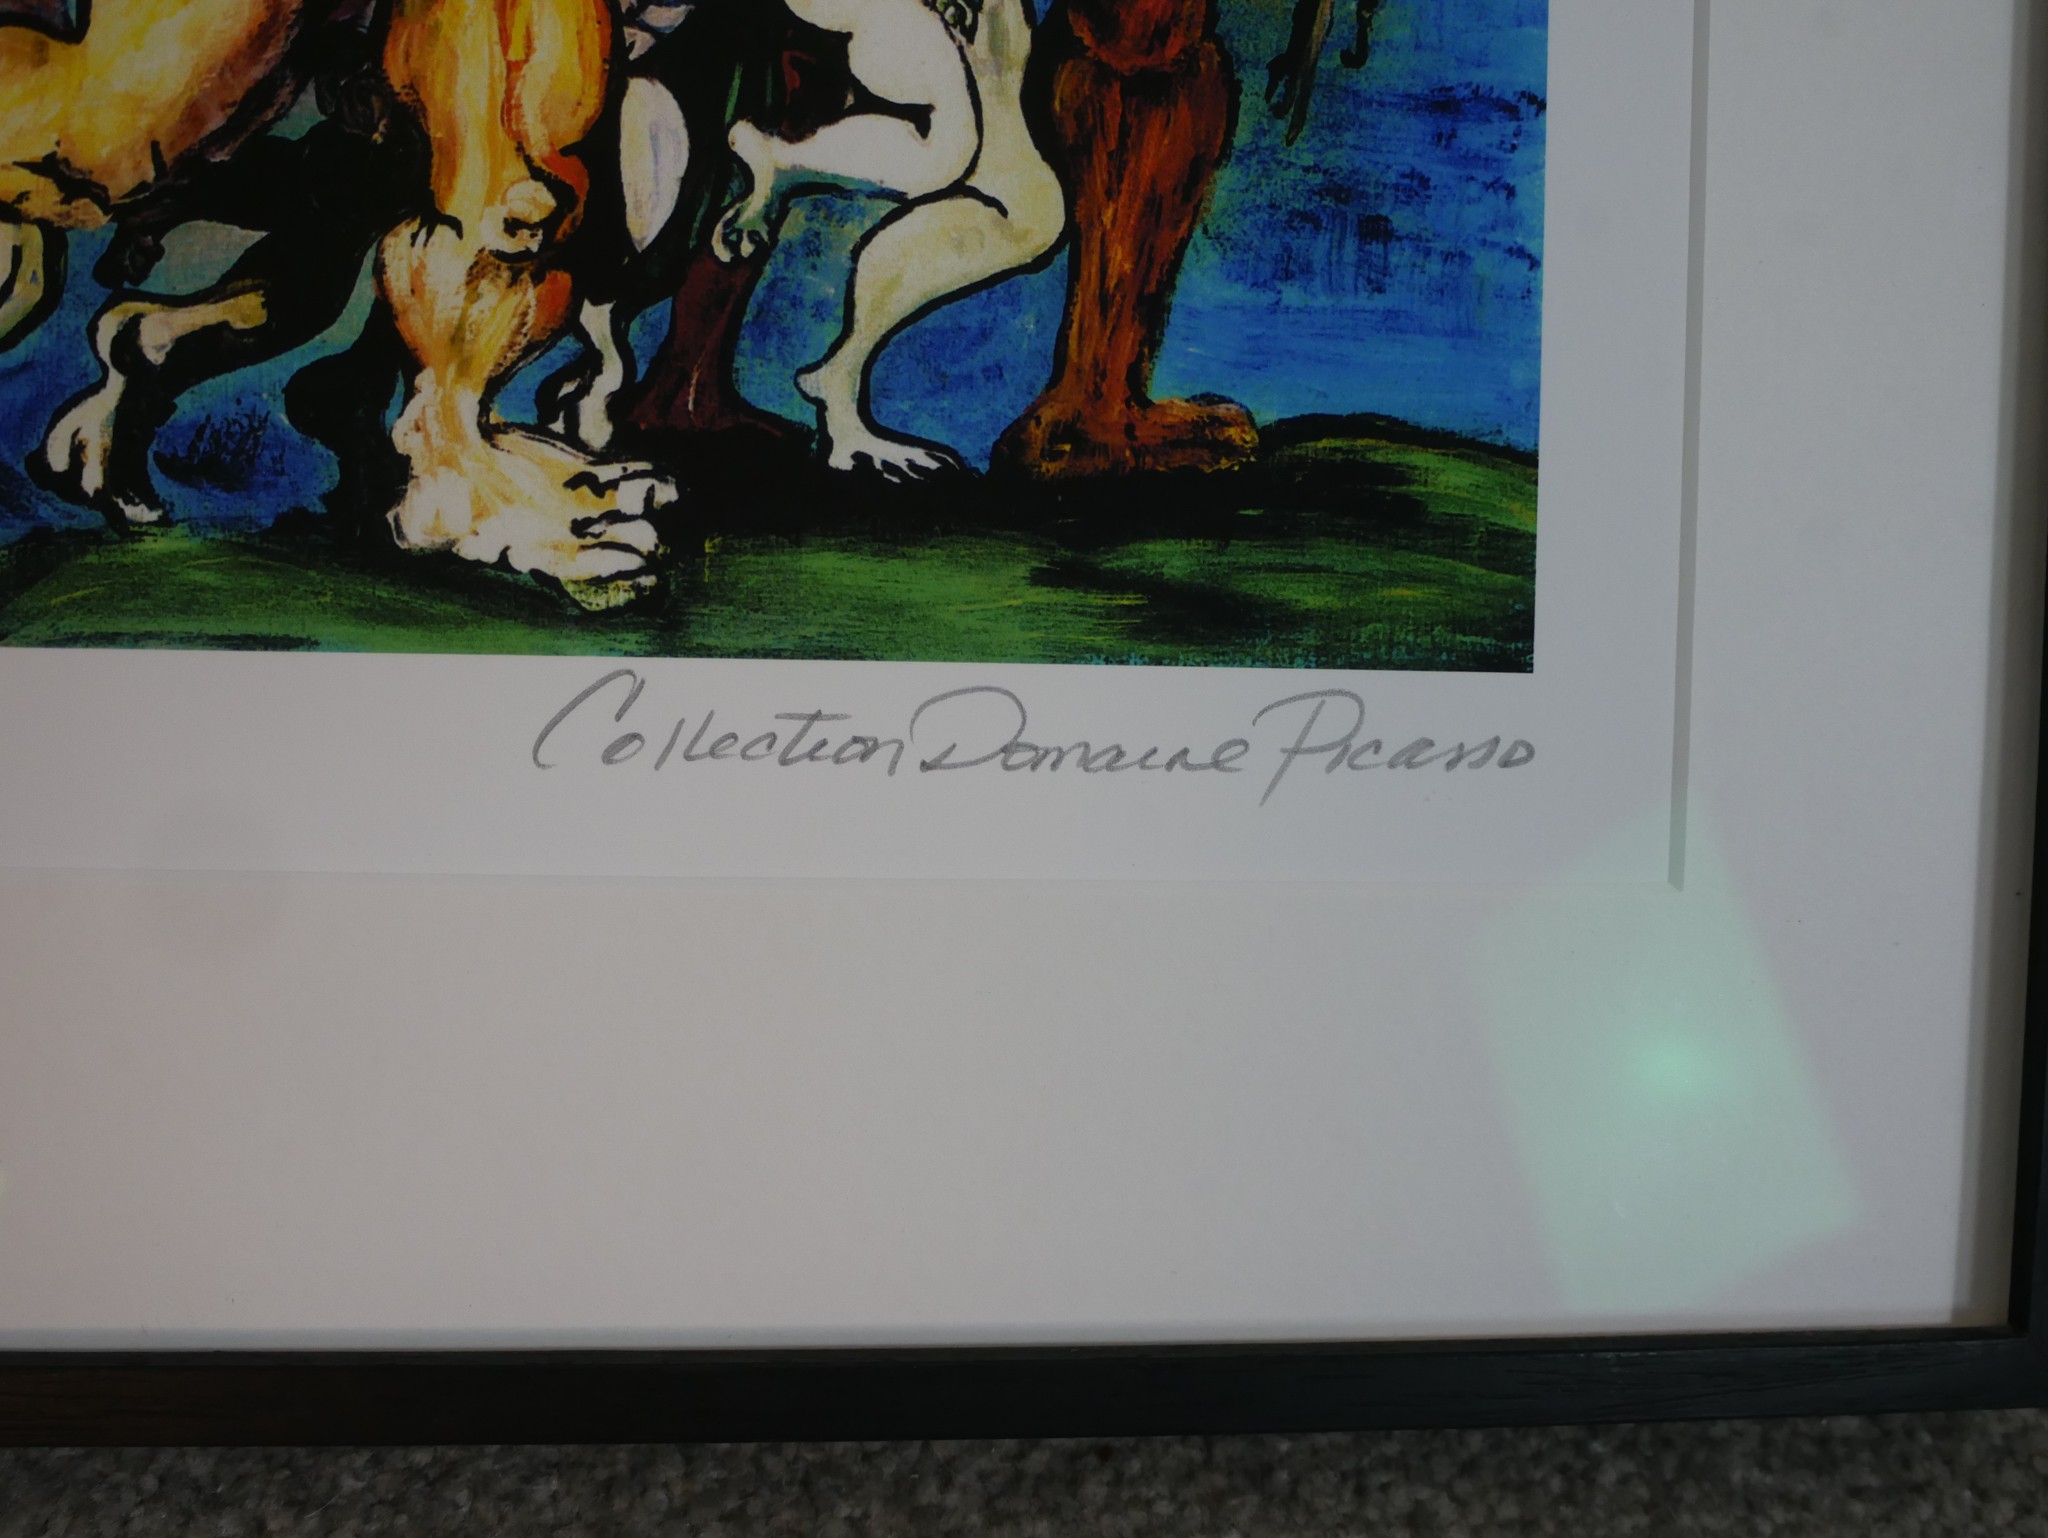 After Pablo Picasso (1881-1973), Silenus Dancing in Company, a coloured limited Collection Domaine - Image 3 of 5